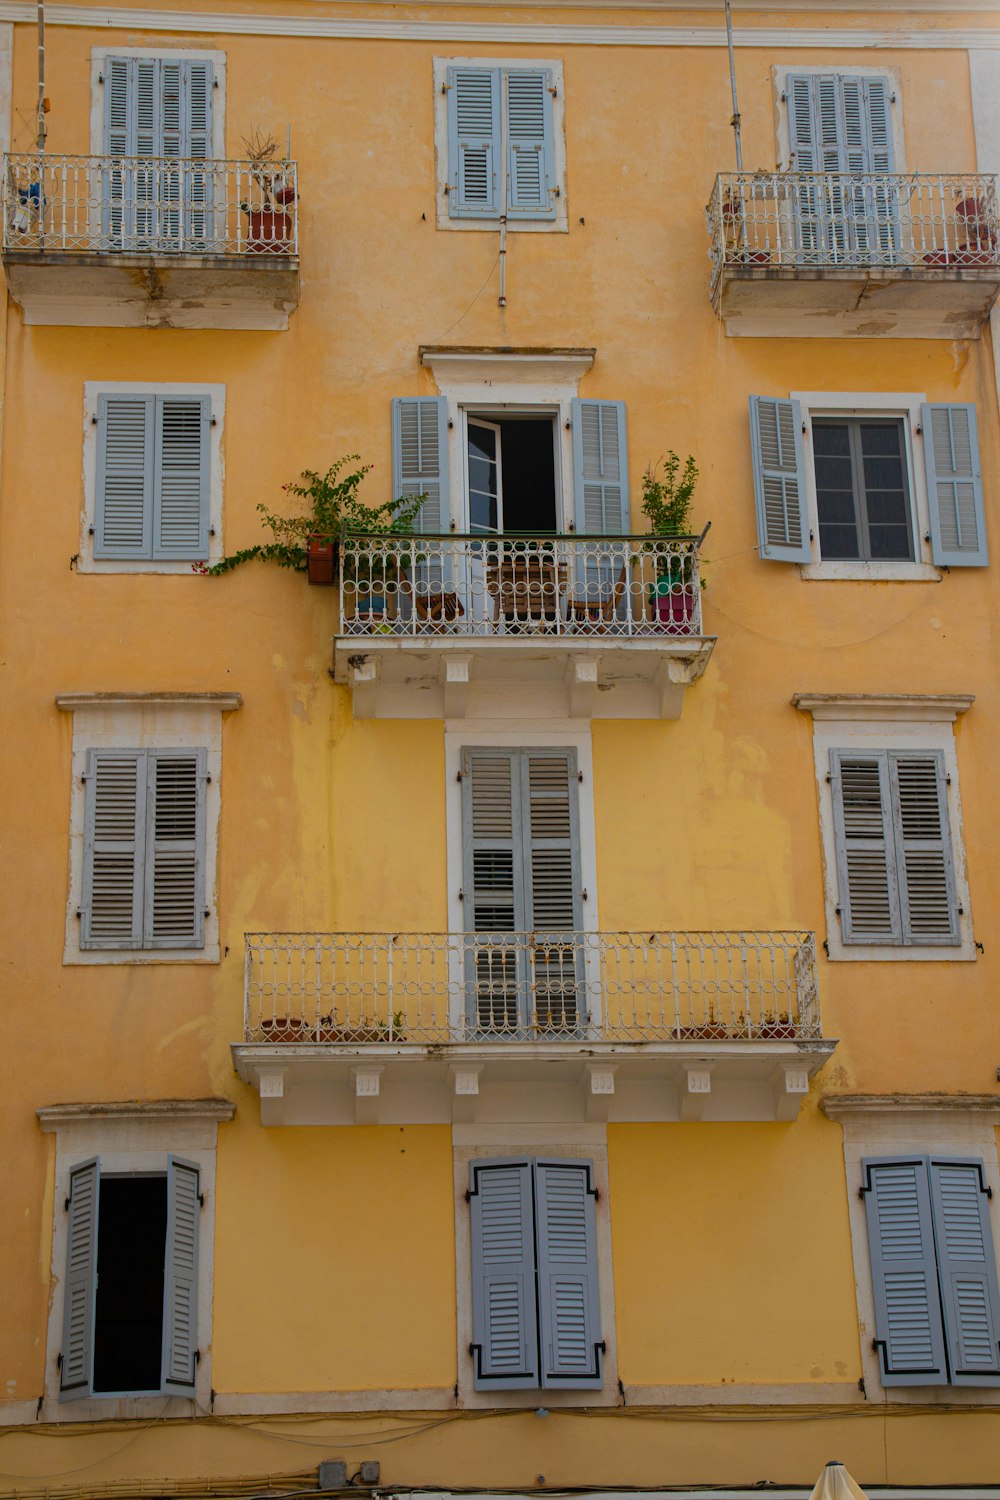 a tall yellow building with balconies and windows